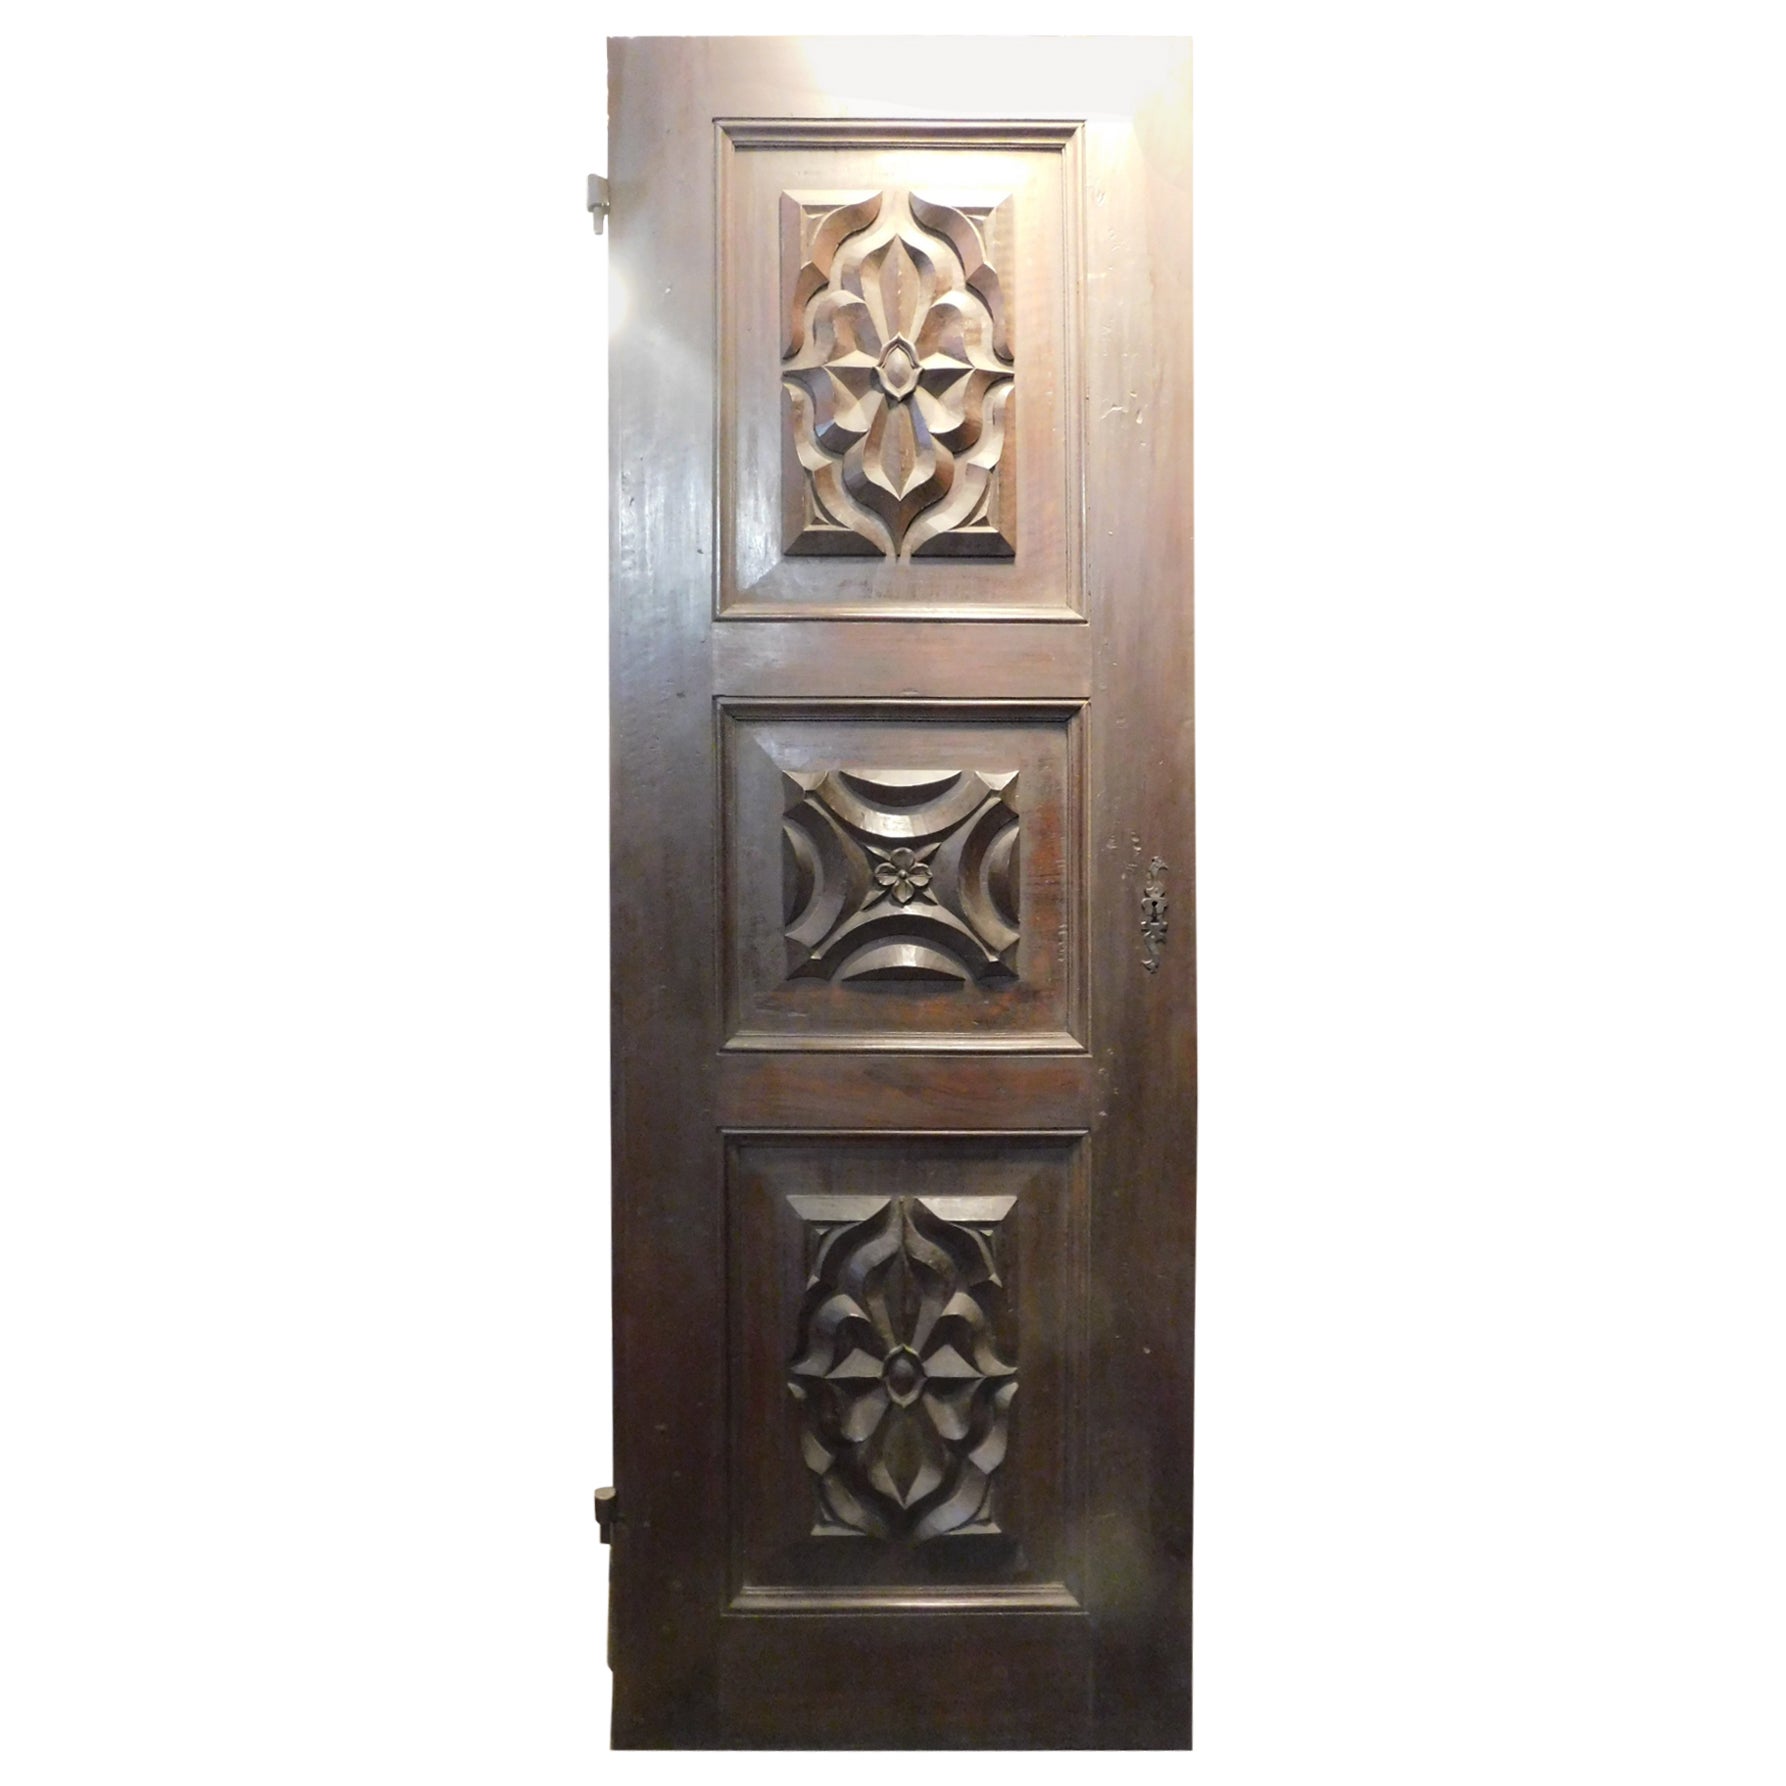 What is a craftsman style door?